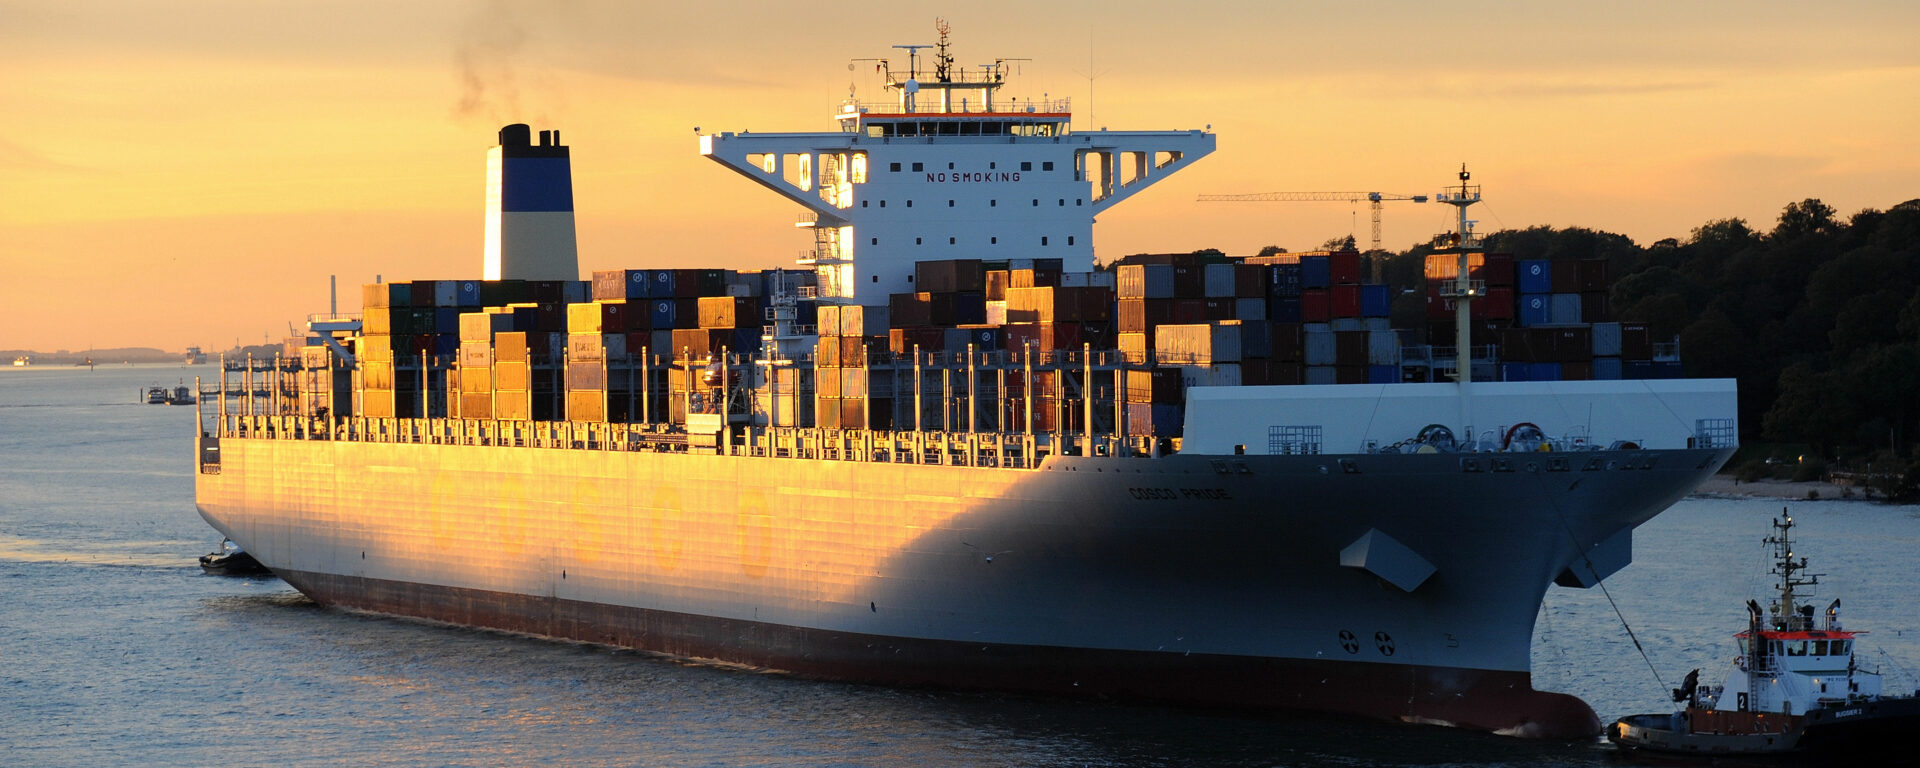 Seaspan Continues to Execute on Growth Strategies Announcing Delivery of Two 13,000 TEU Vessels